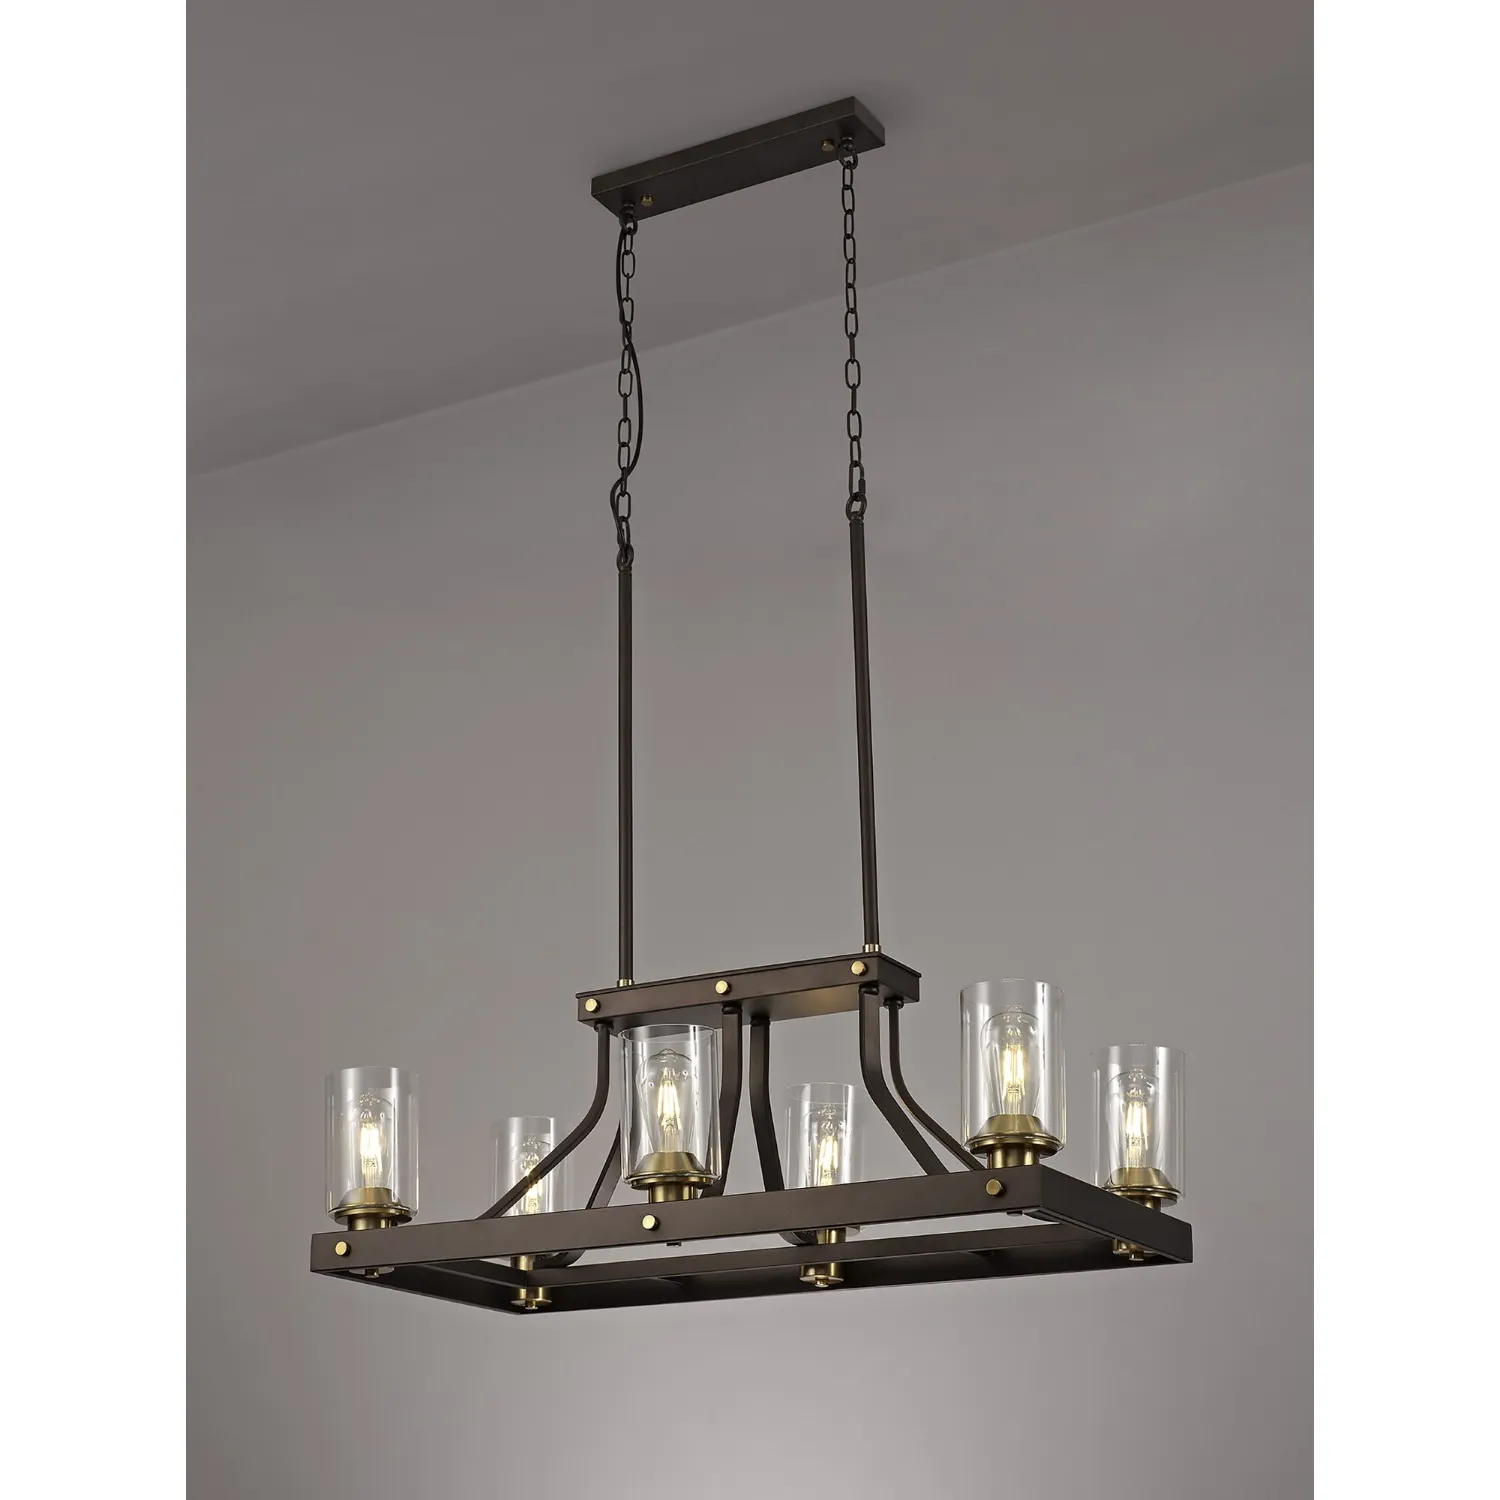 Kennington Linear Pendant 6 Light E27, Brown Oxide Gold Bronze With Clear Glass Shades